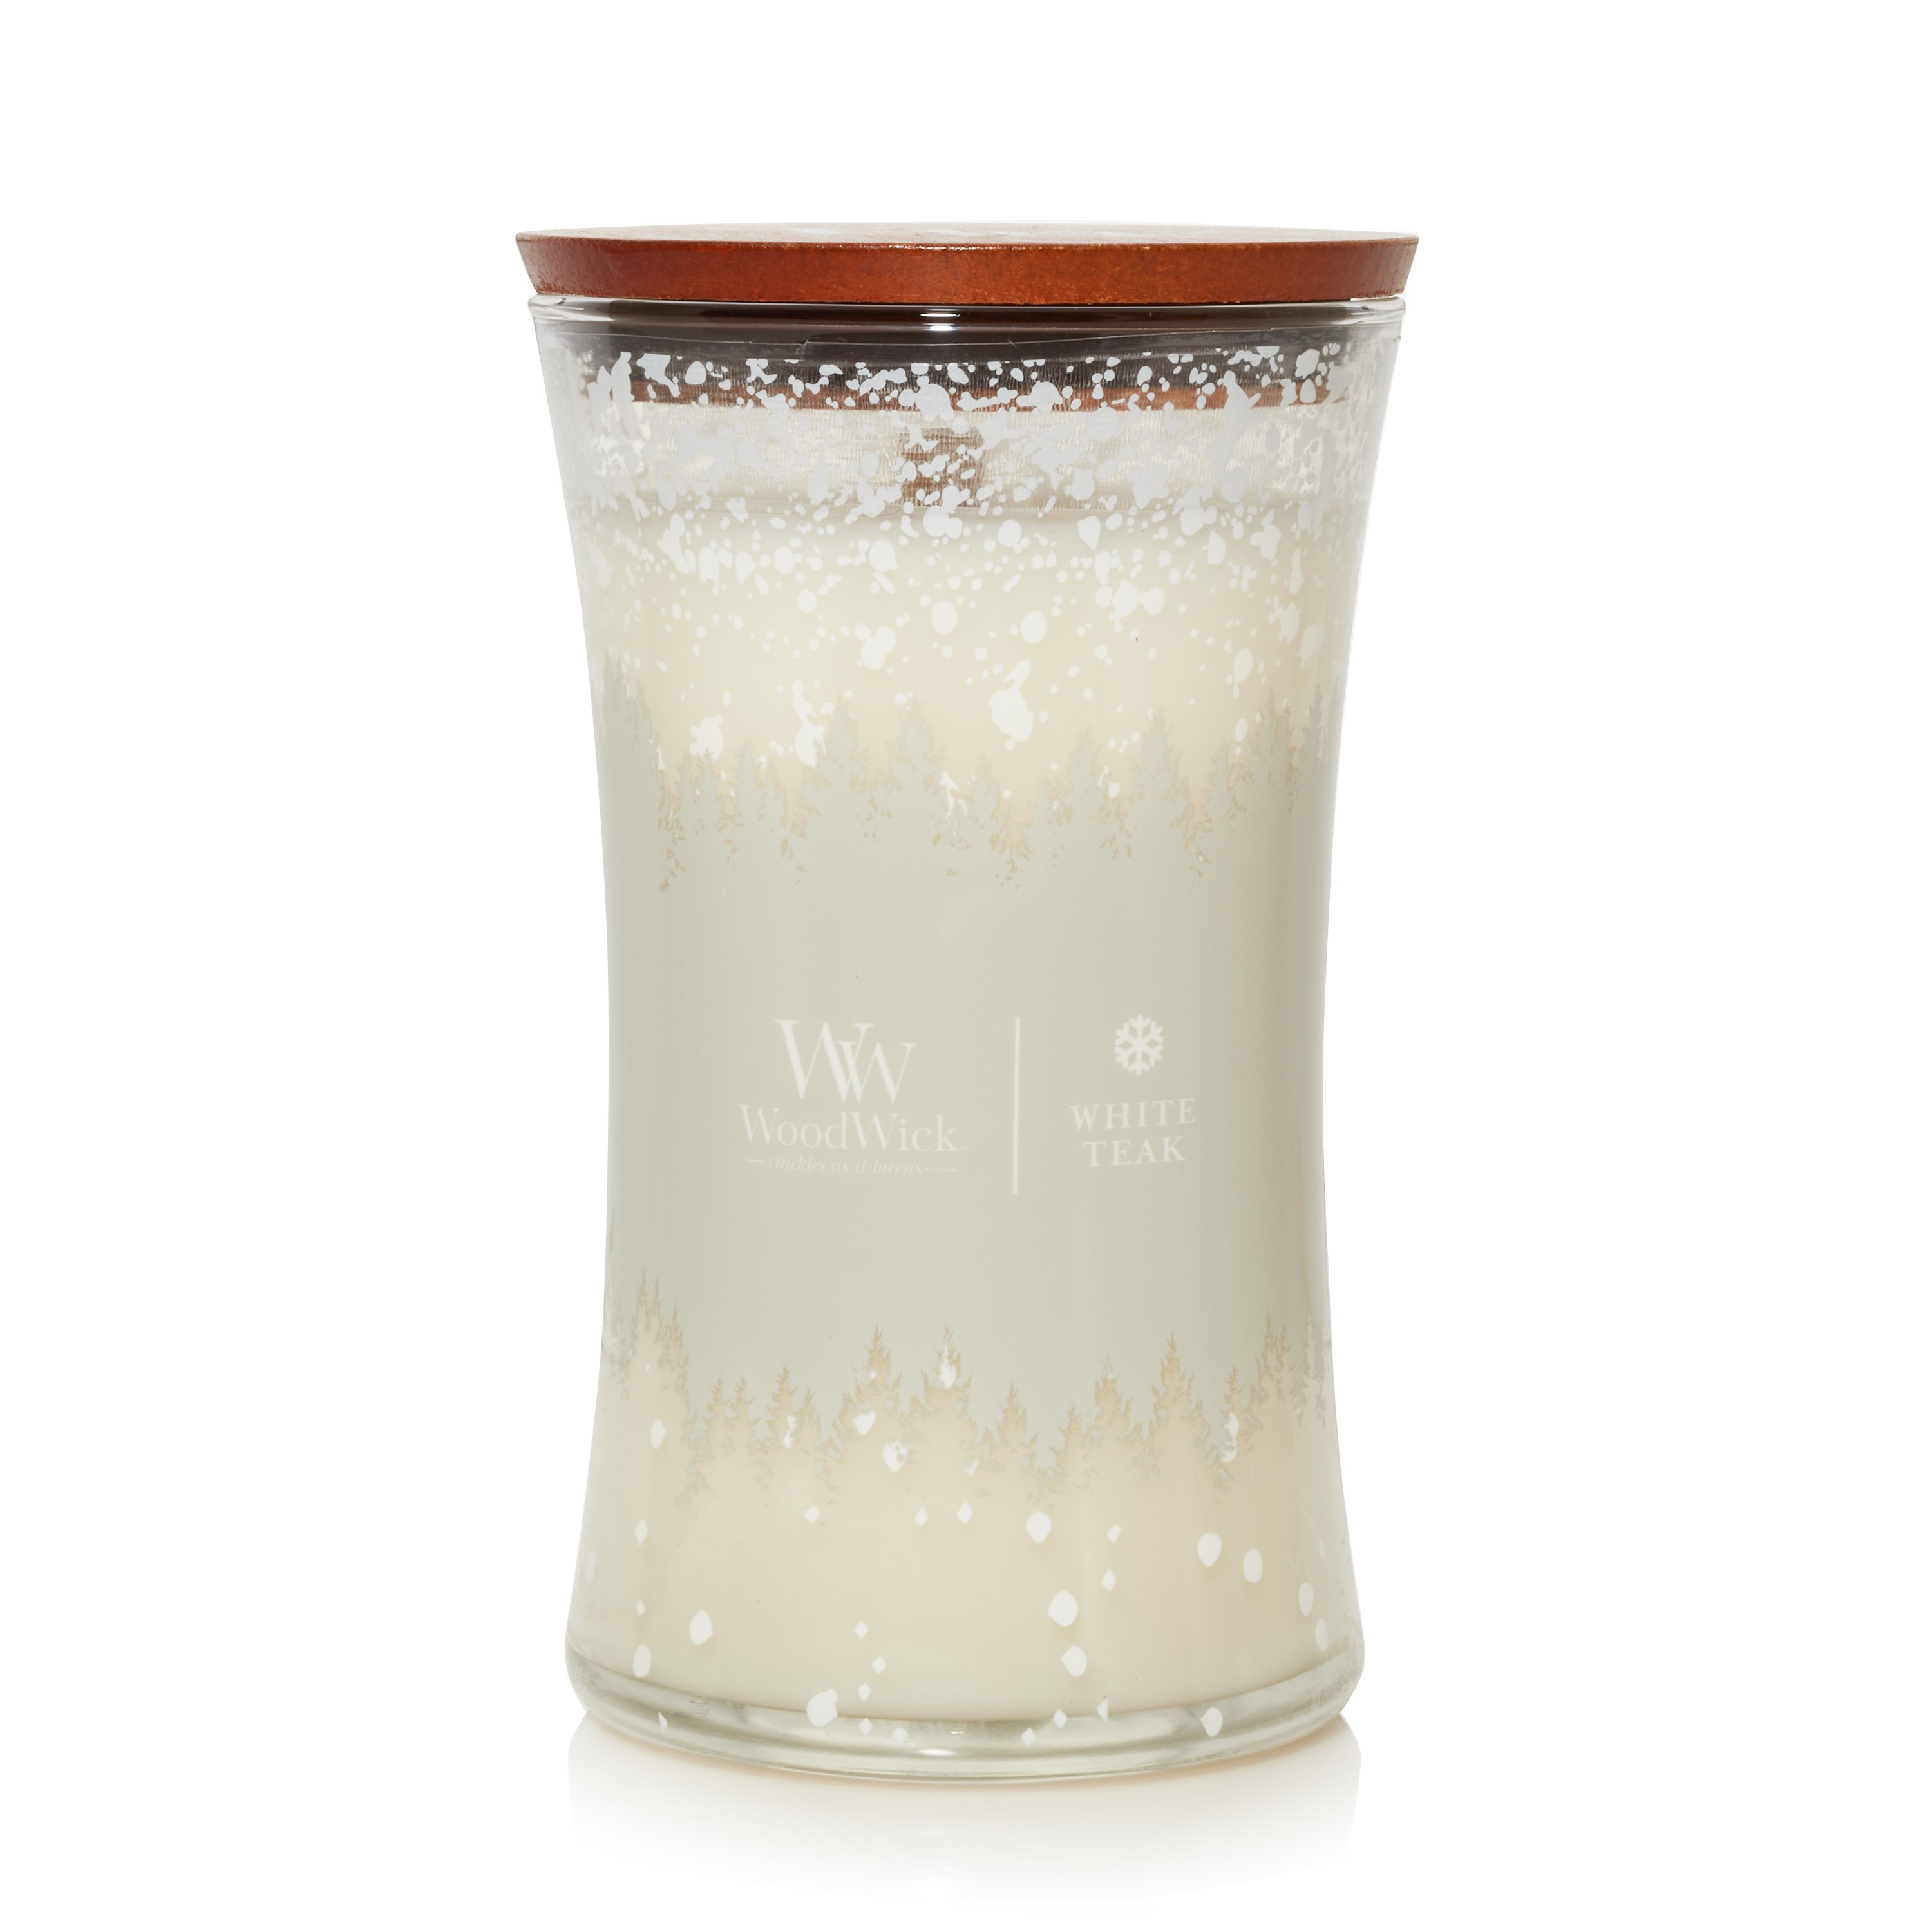 WoodWick® White Teak Large Hourglass Candle 